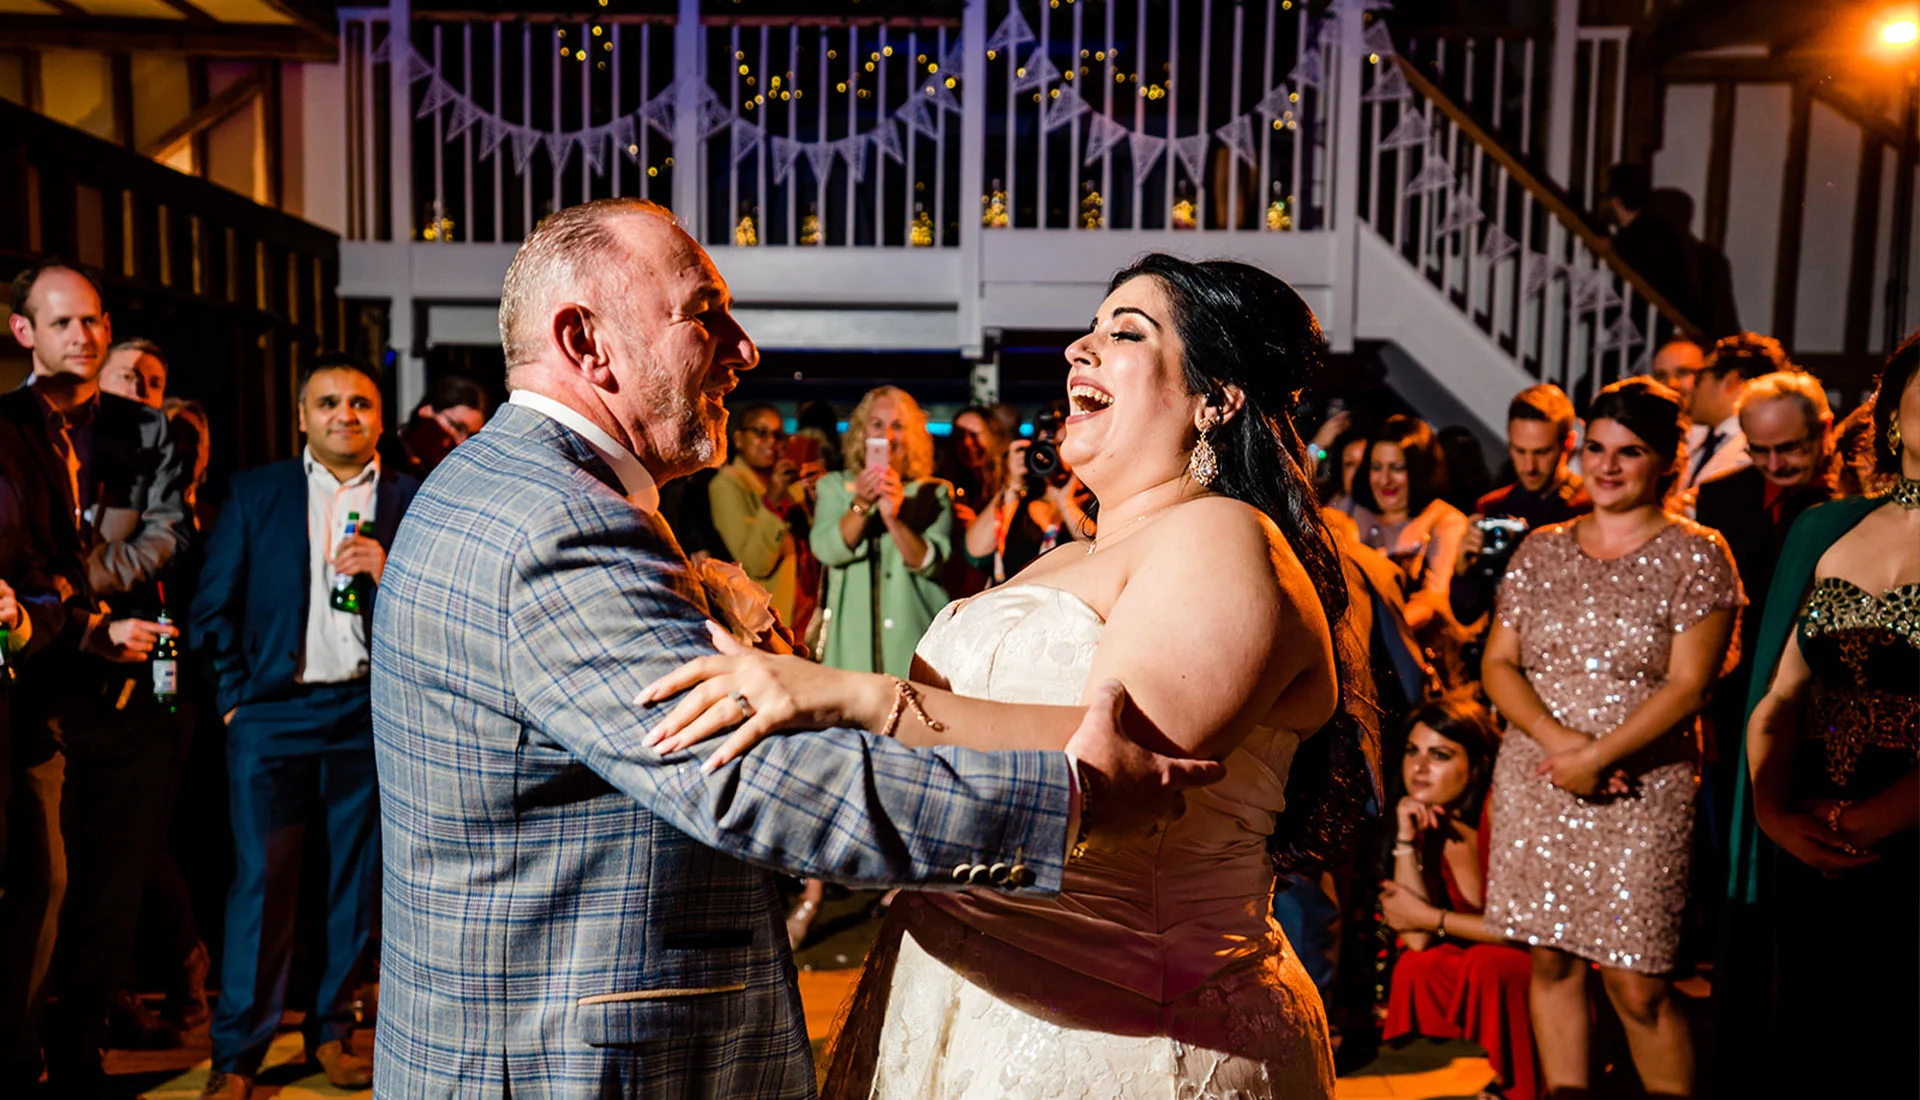 Beautiful songs that will make your father-daughter dance perfect